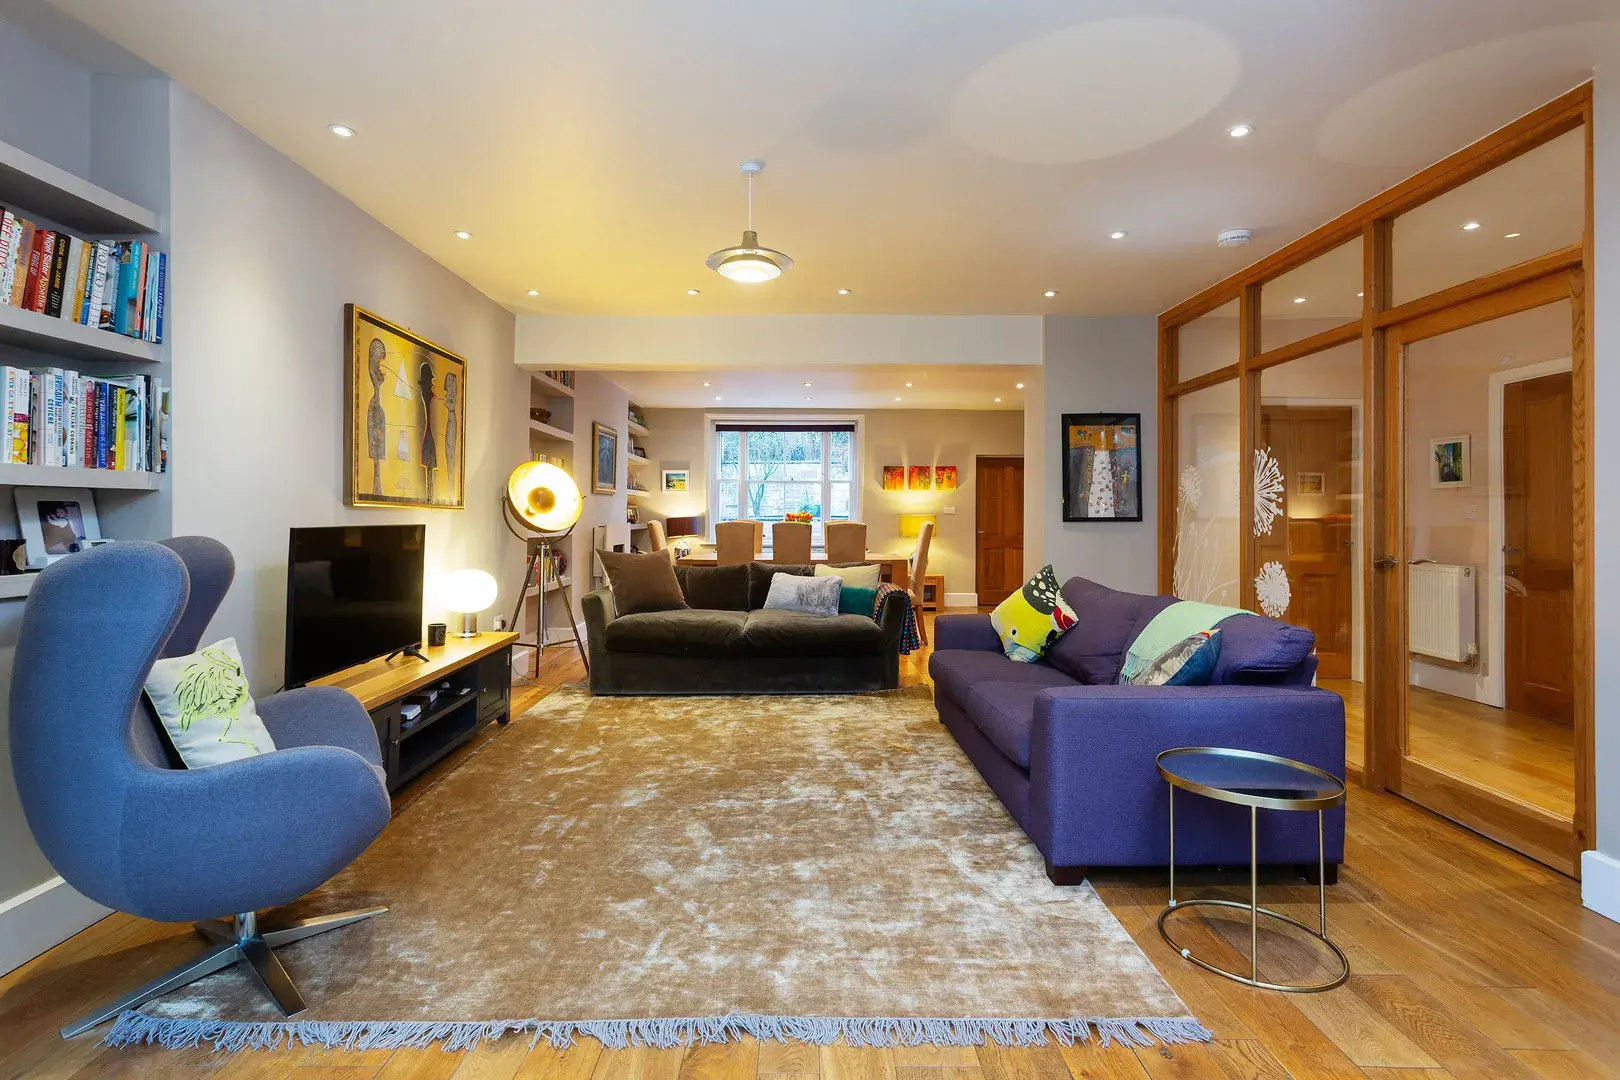 Oval Road, holiday home in Primrose Hill, London